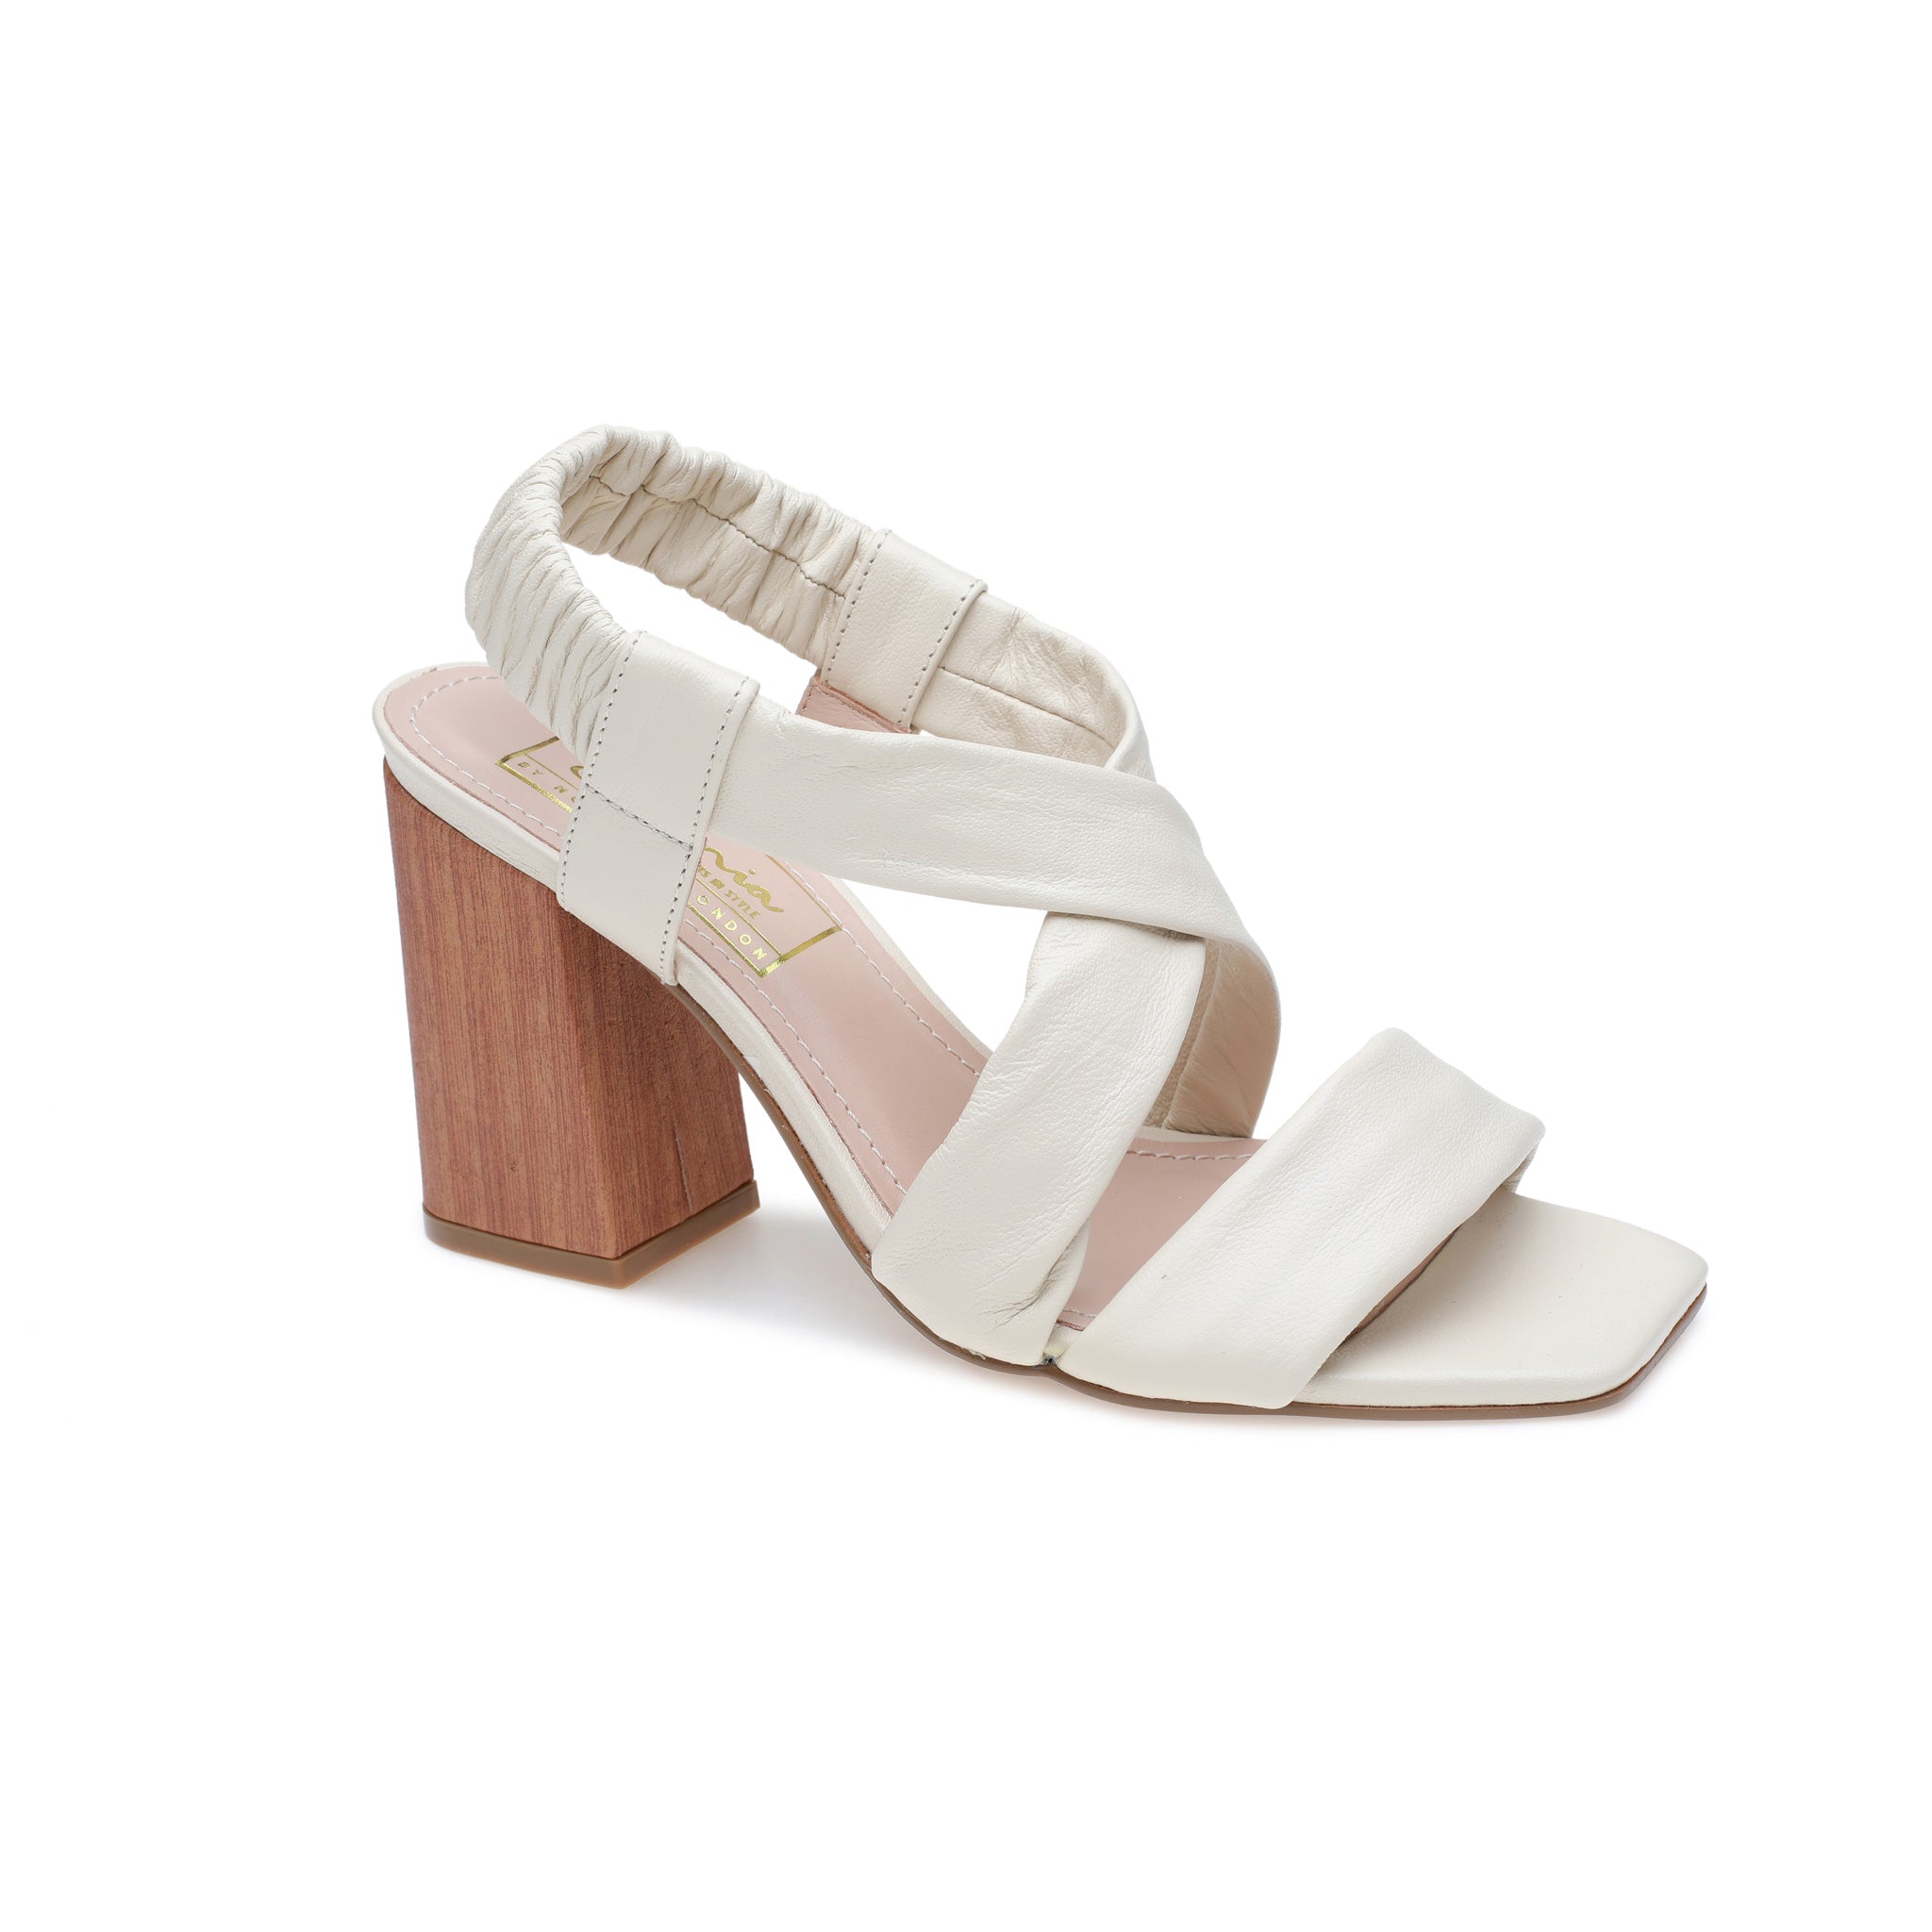 Off White Leather Cross Over Sandals